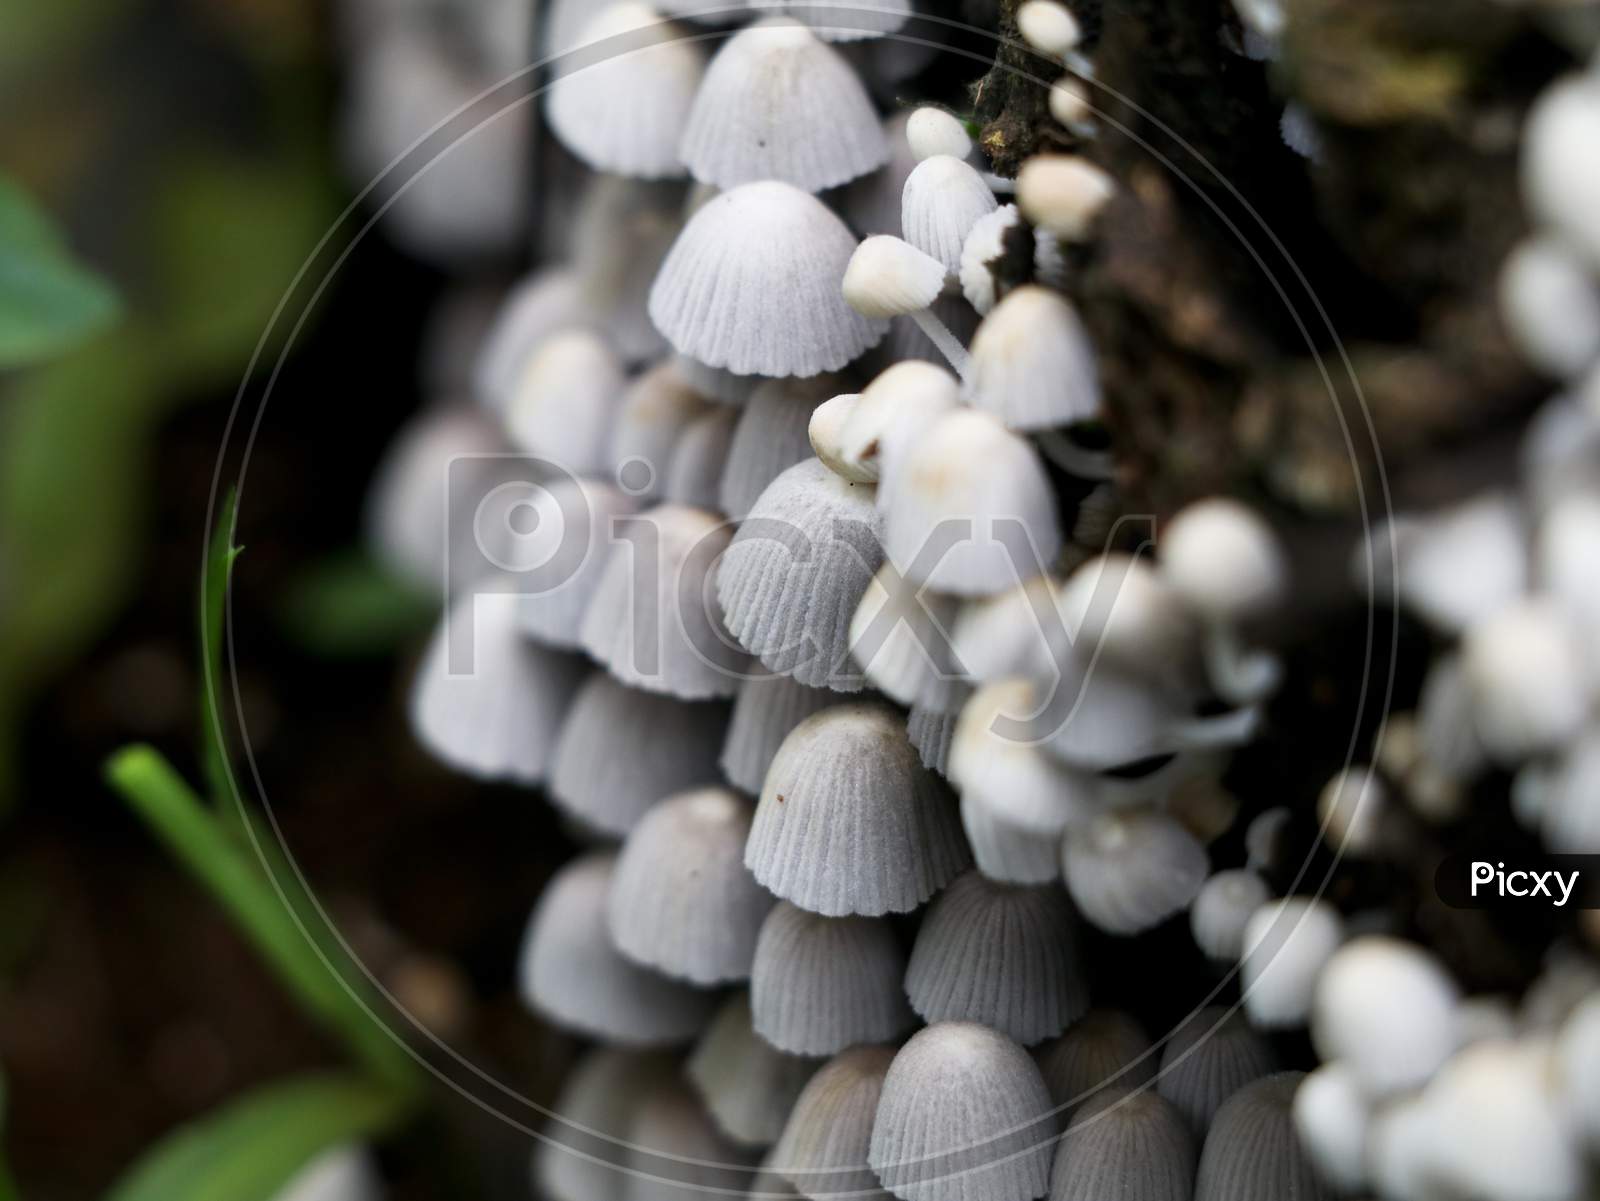 Tiny  White Color Mushrooms  Or Conks  On A Decaying Tree, Selective Focus